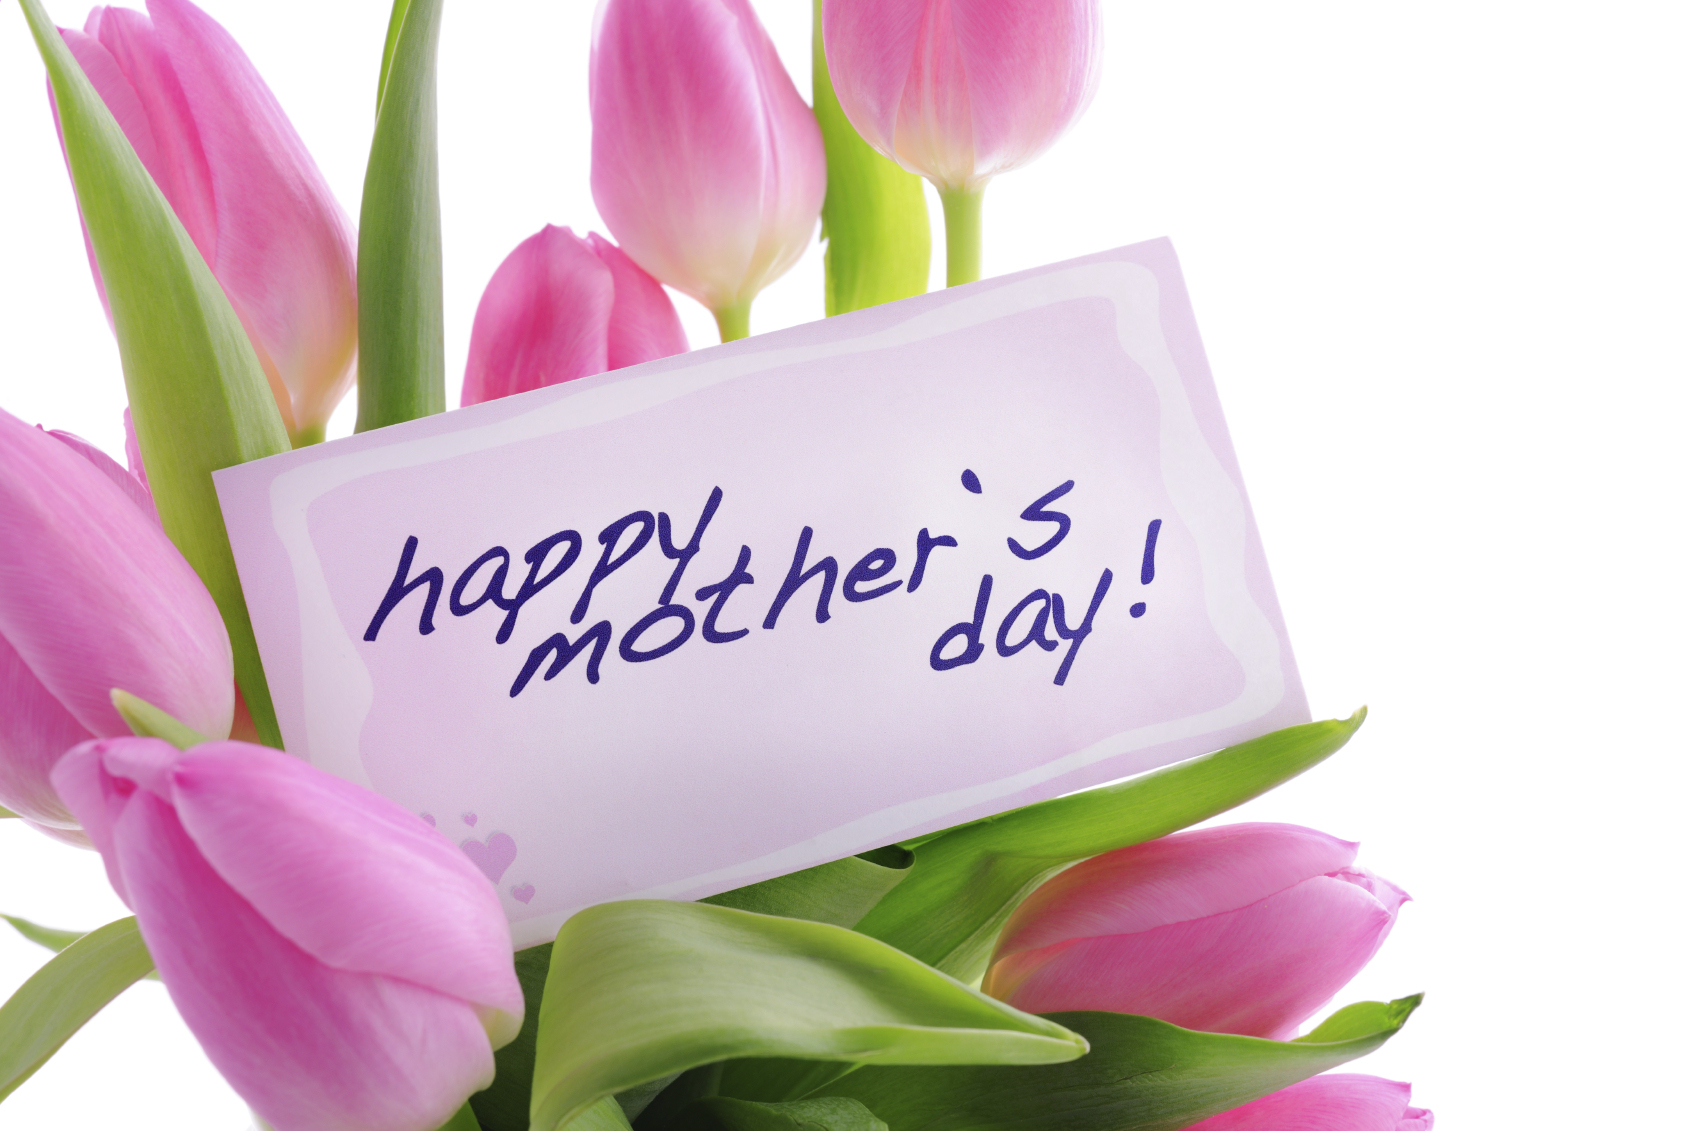 mother-s-day-spending-2015-fortiviti